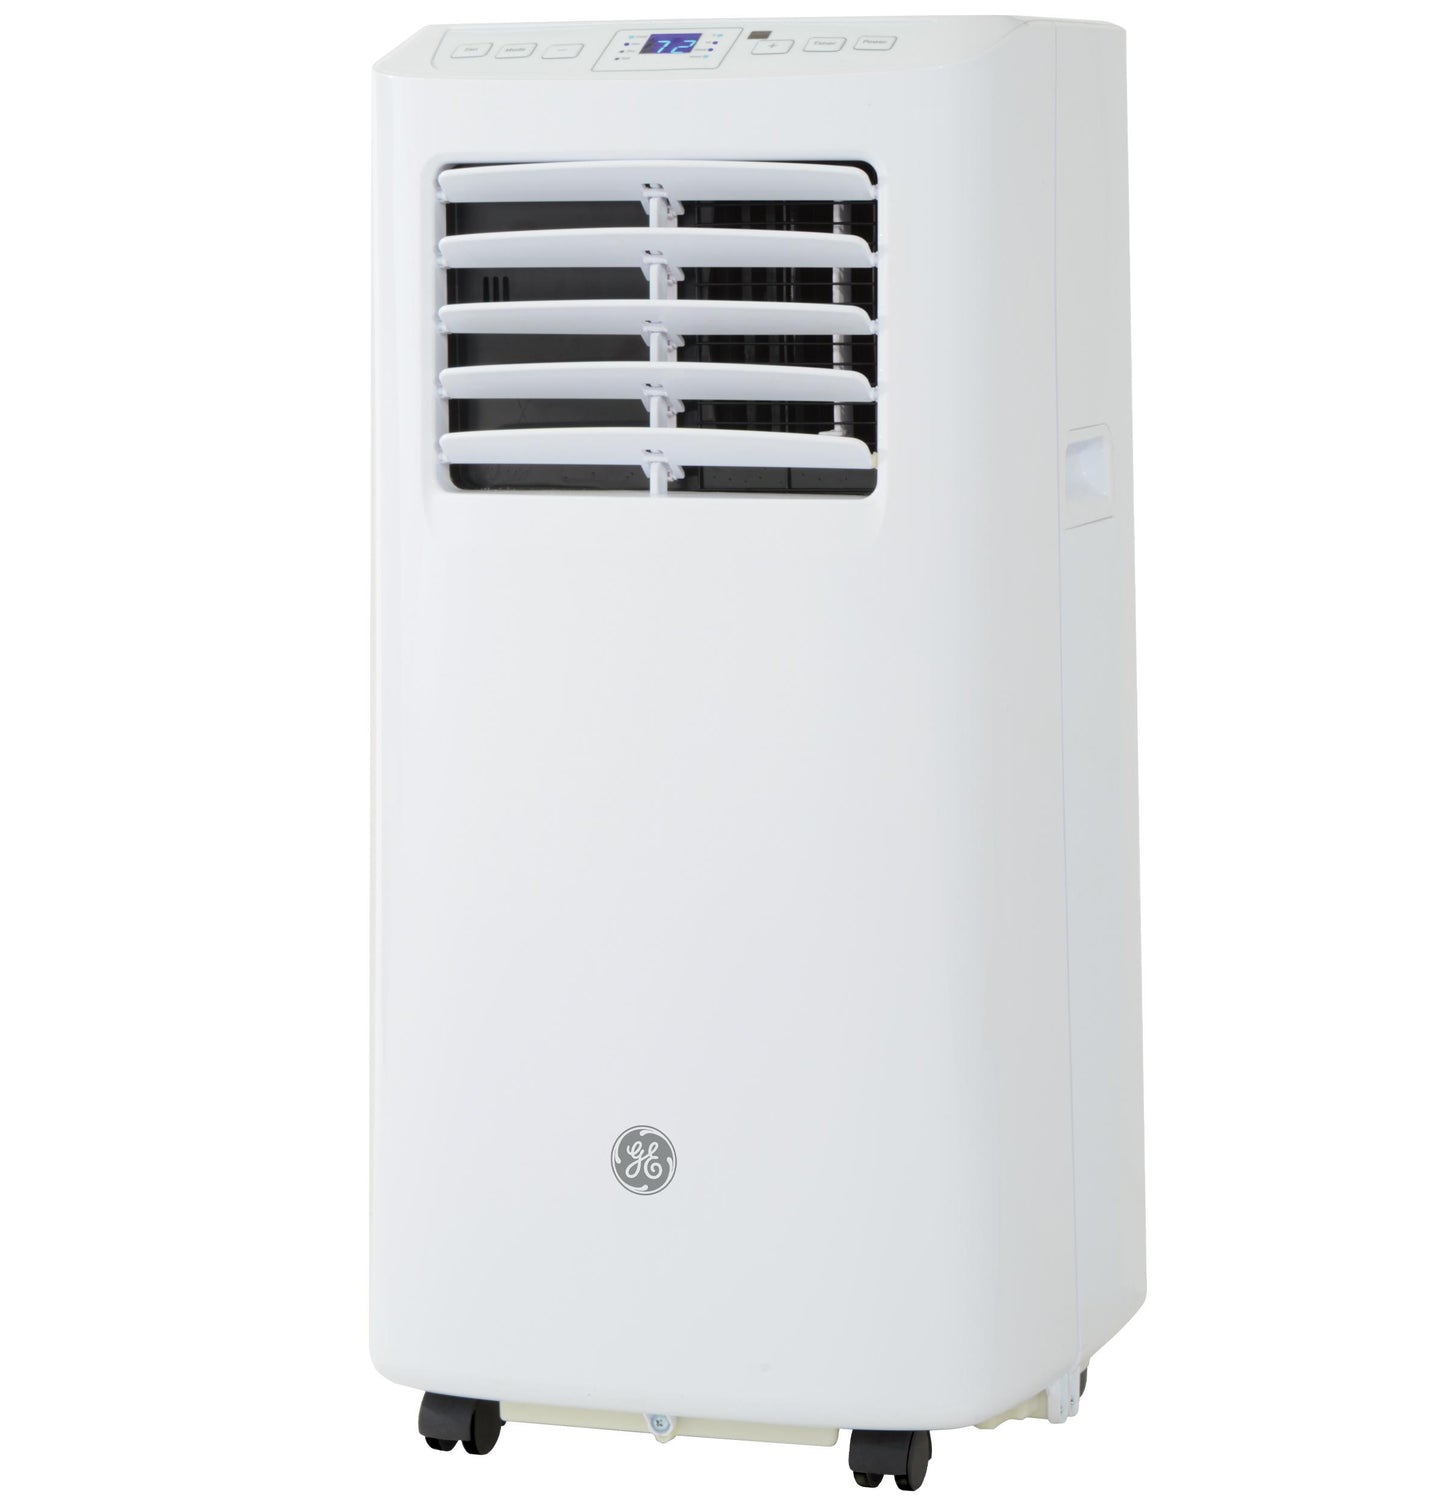 Ge Appliances APFD05JASW Ge® 5,100 Btu Portable Air Conditioner With Dehumidifier And Remote, White